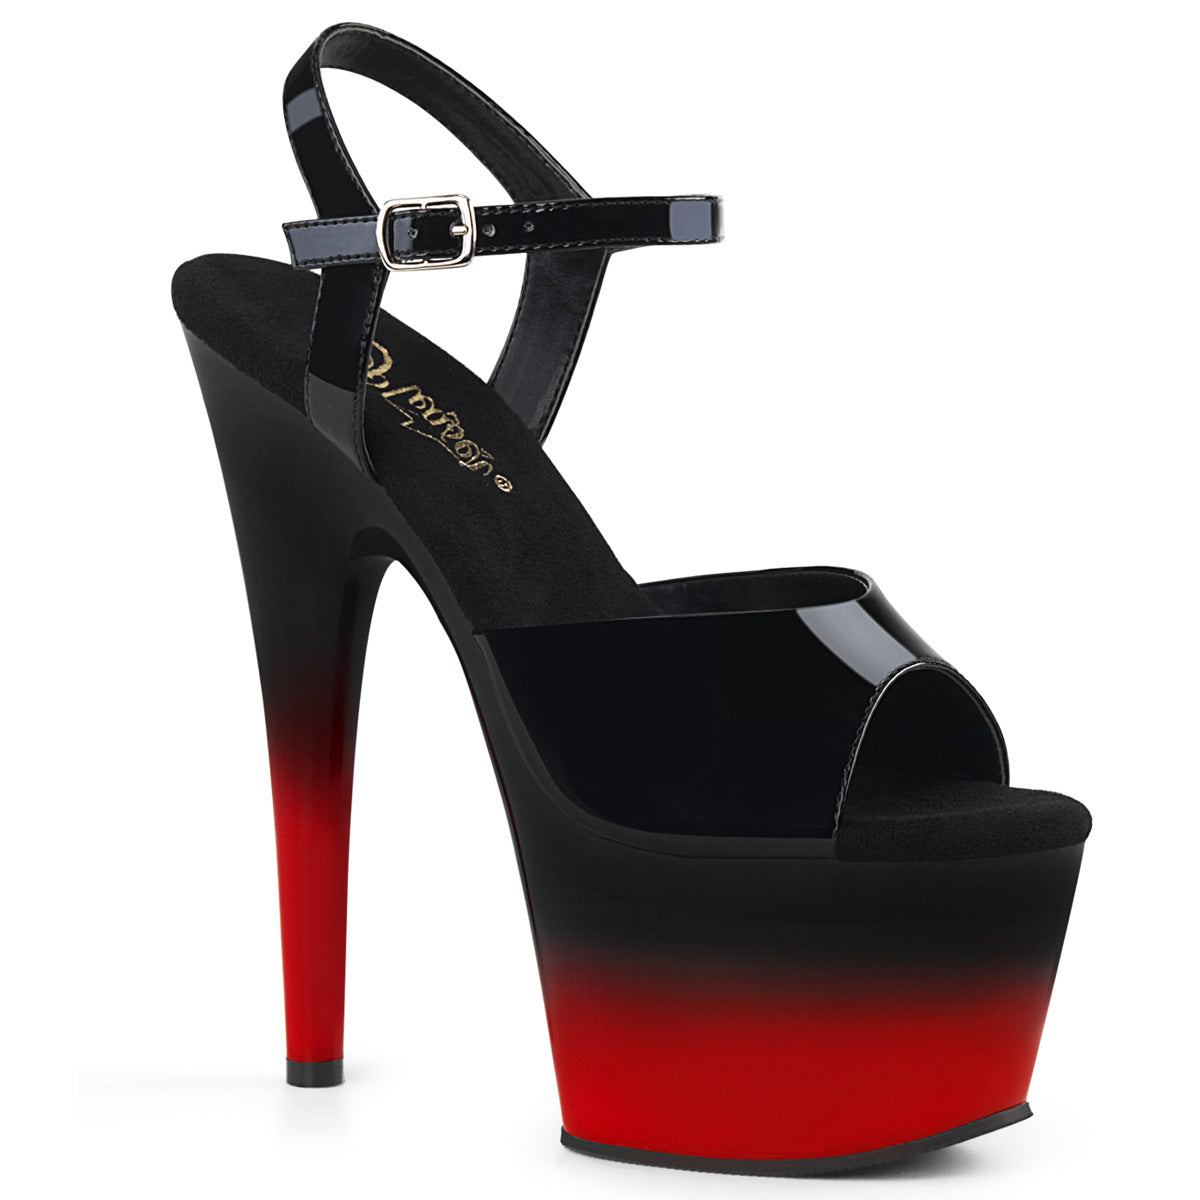 ADORE-709BR-H Pleaser 7" Heel Black Patent Pole Dancing Shoe-Pleaser- Sexy Shoes